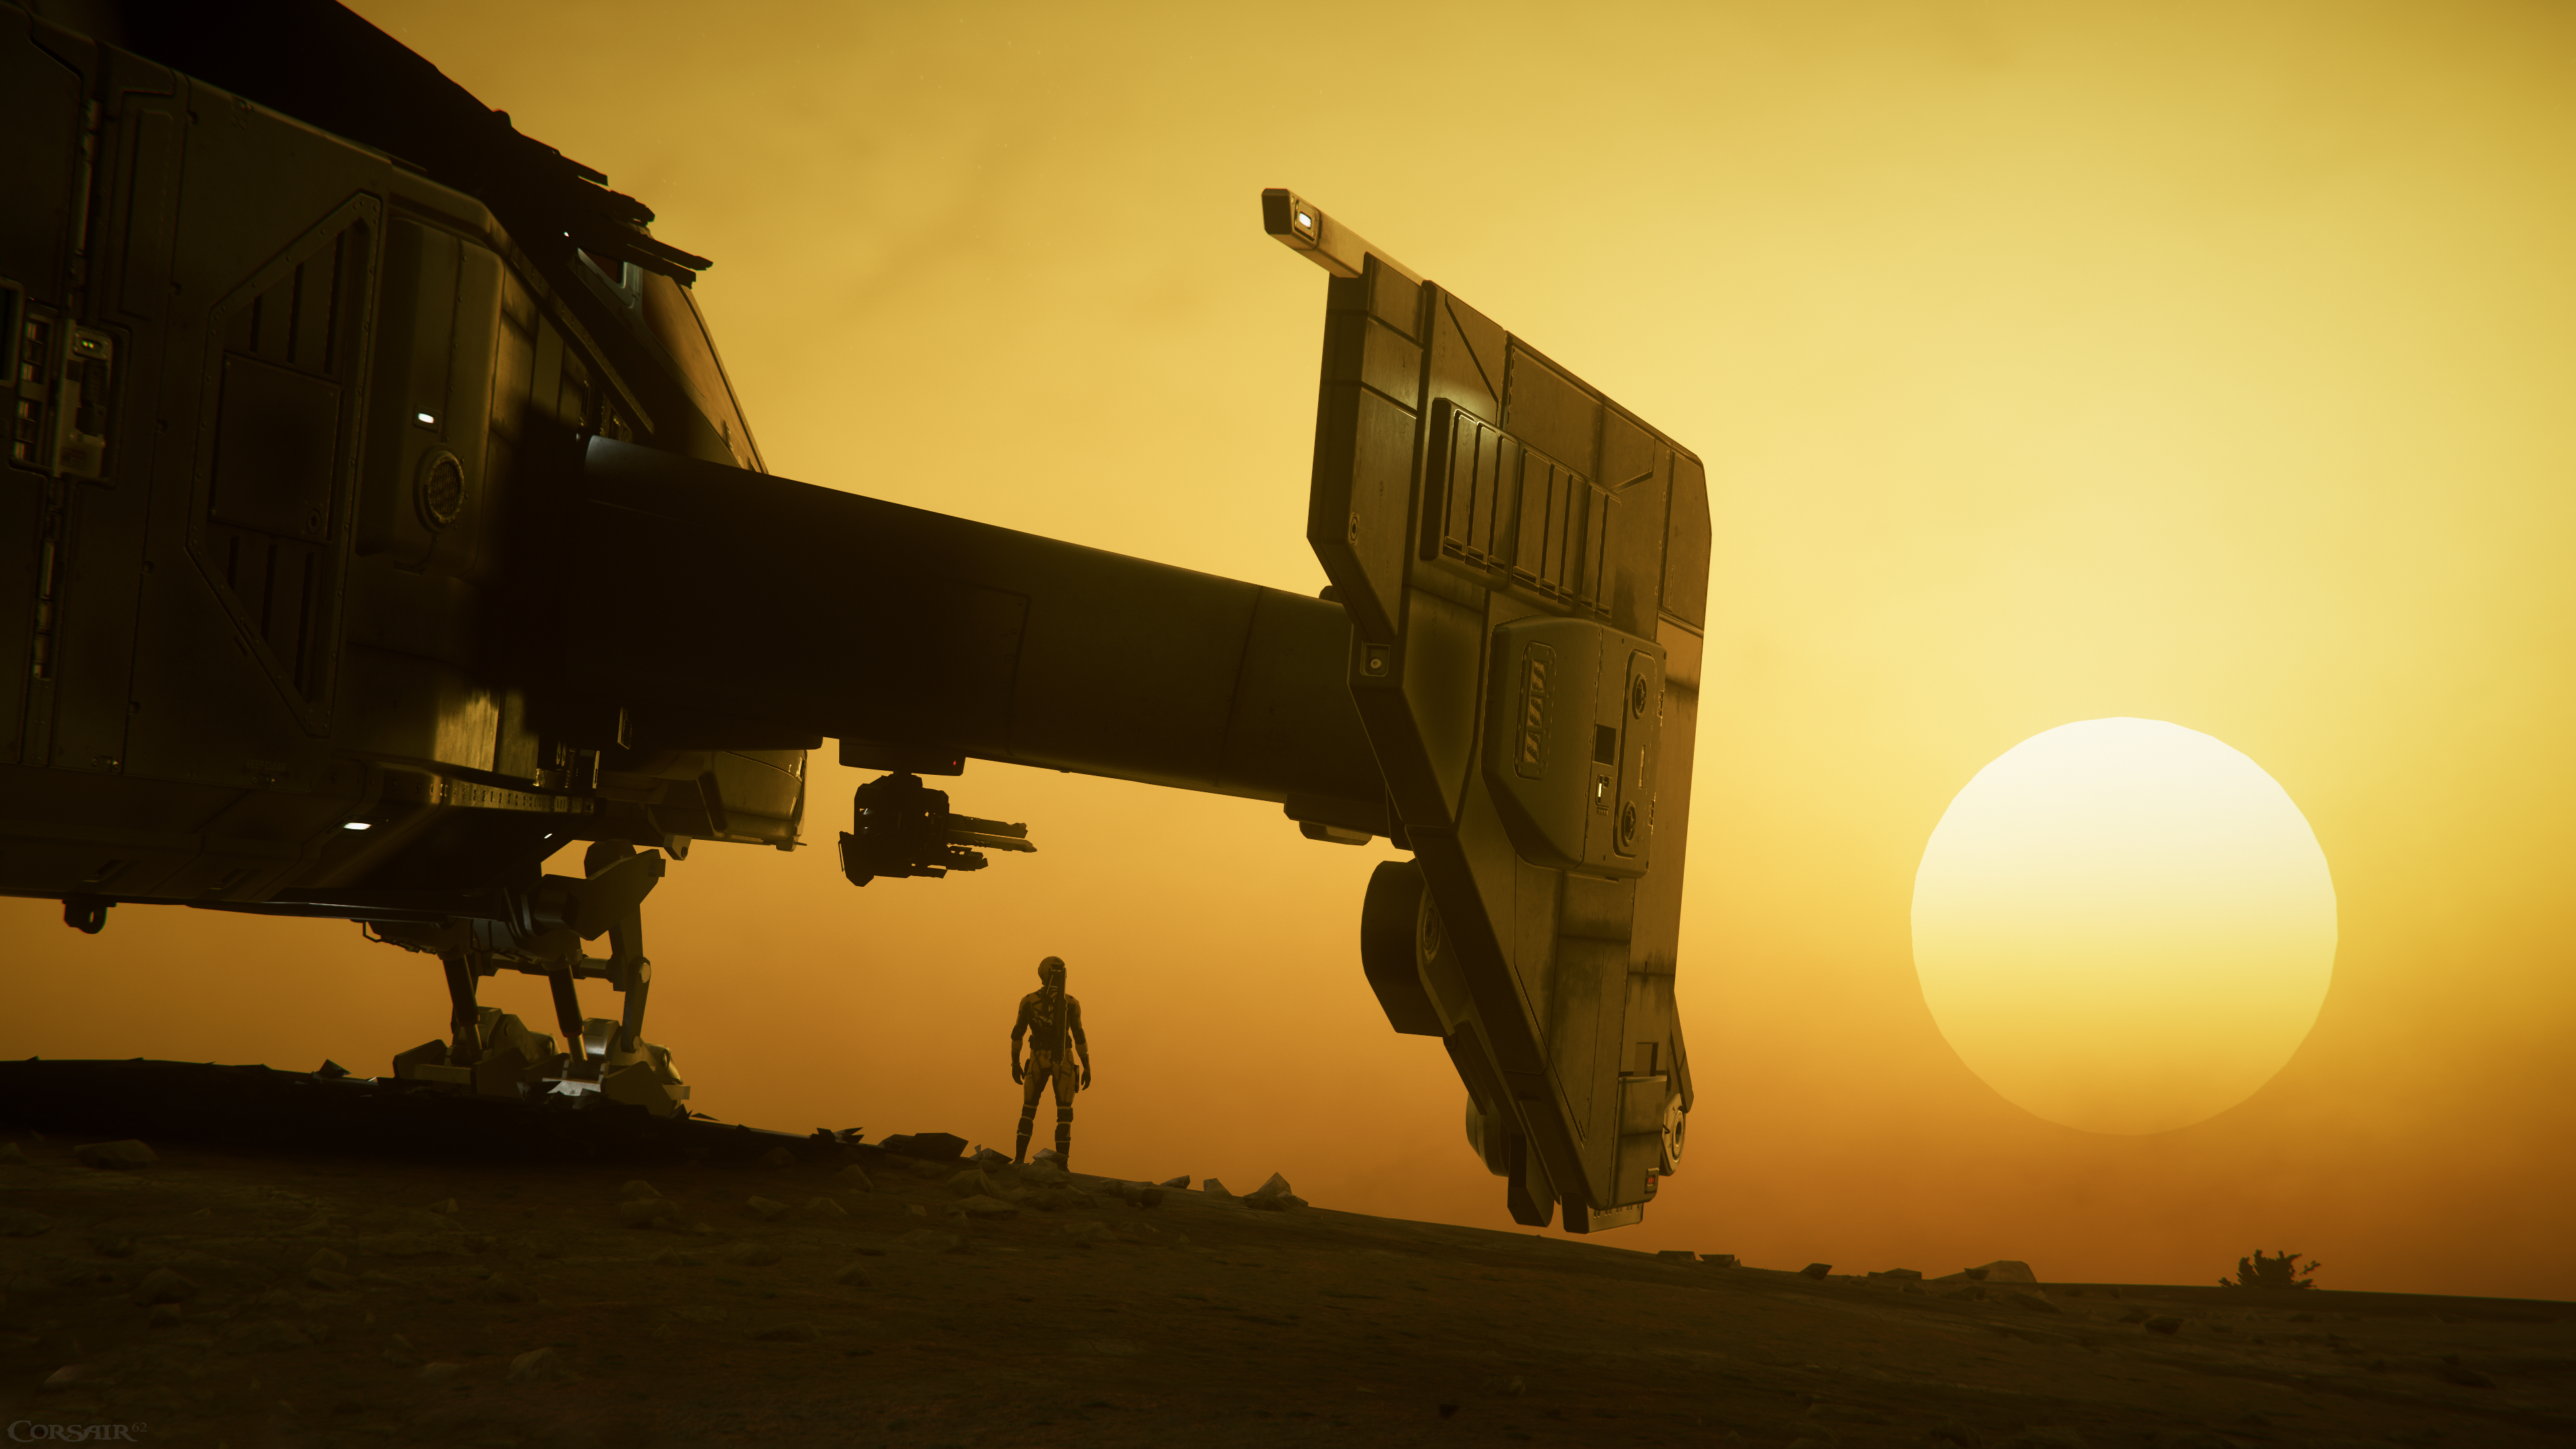 star citizen game 2019 4k 1547938488 - Star Citizen Game 2019 4k - star citizen wallpapers, spaceship wallpapers, pc games wallpapers, hd-wallpapers, games wallpapers, 4k-wallpapers, 2019 games wallpapers